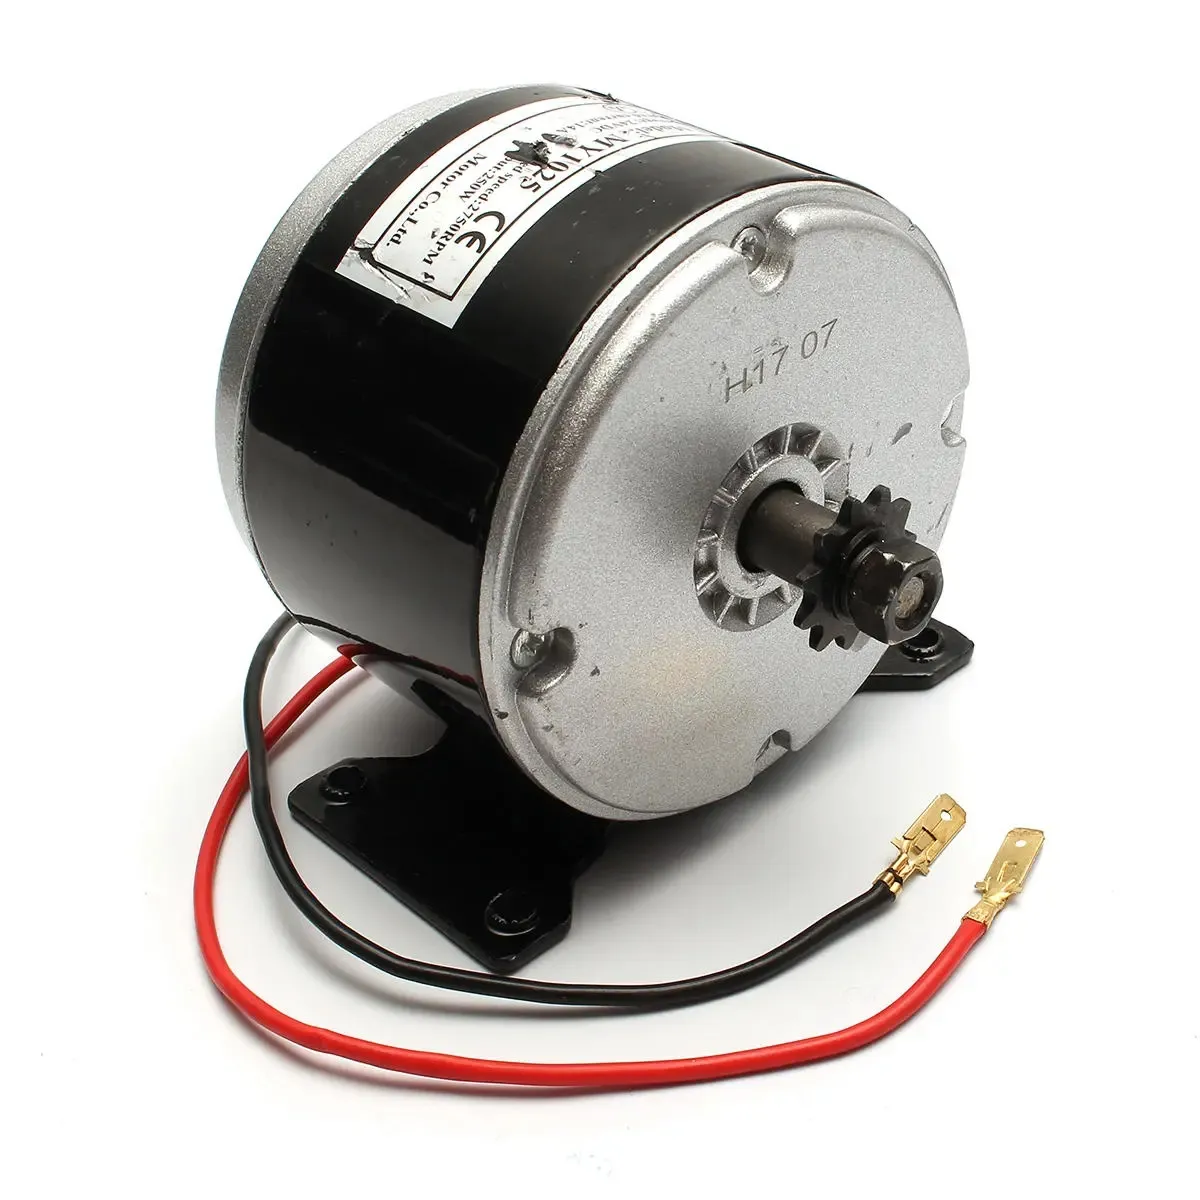 24V 200W 2750 RPM Electric Brushed Bike Scooter Motor Clockwise 2 Wire ZY MY 1016